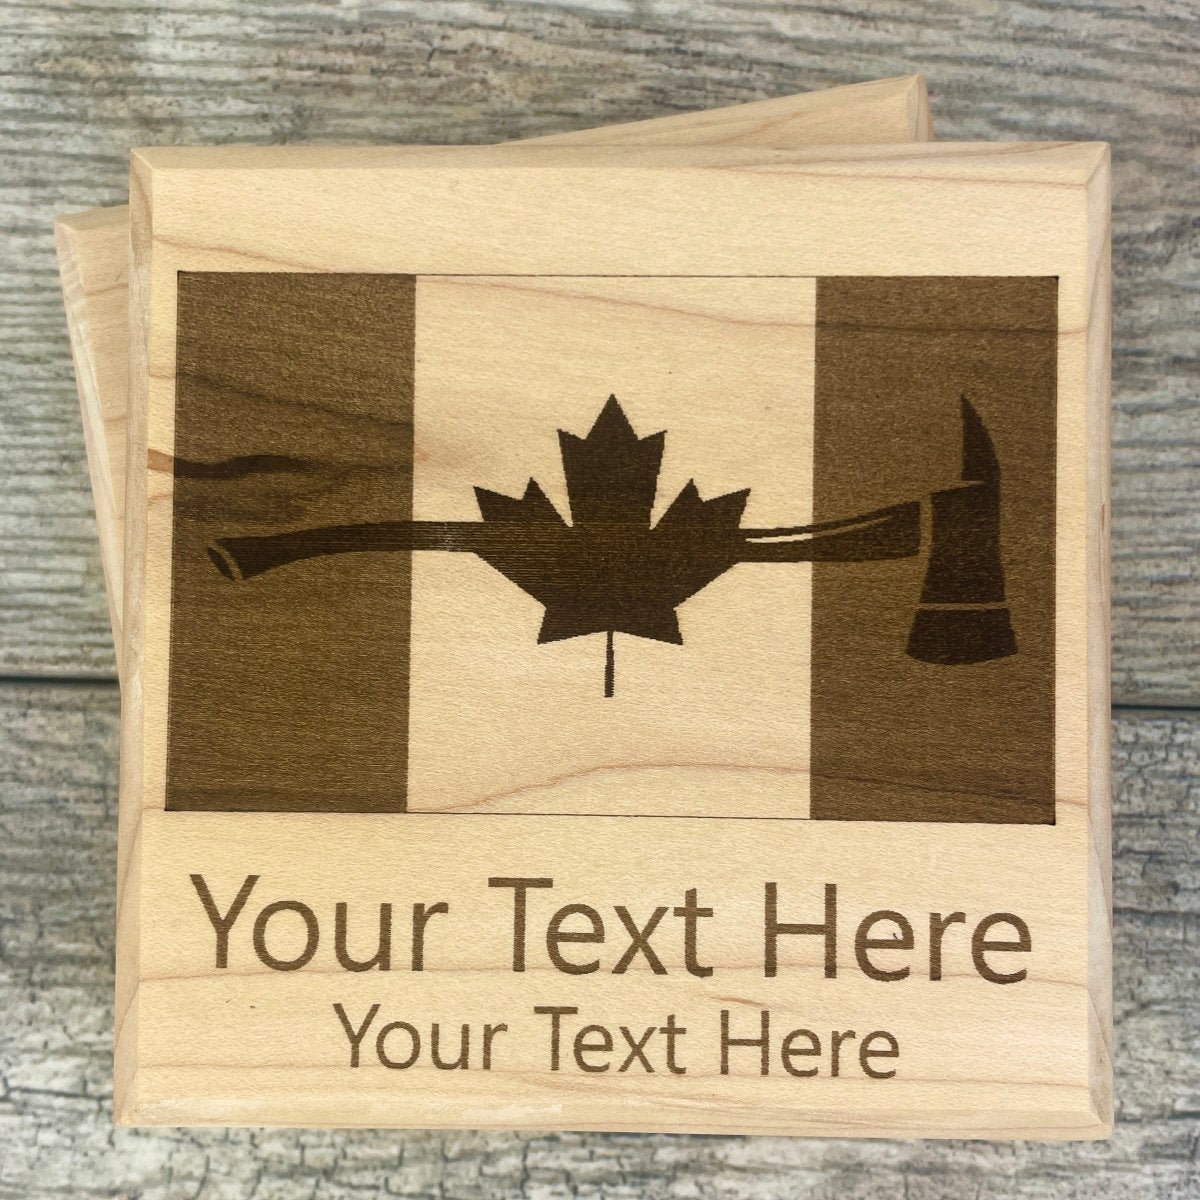 First Responder Themed Coasters Set of 2 - DaRosa Creations